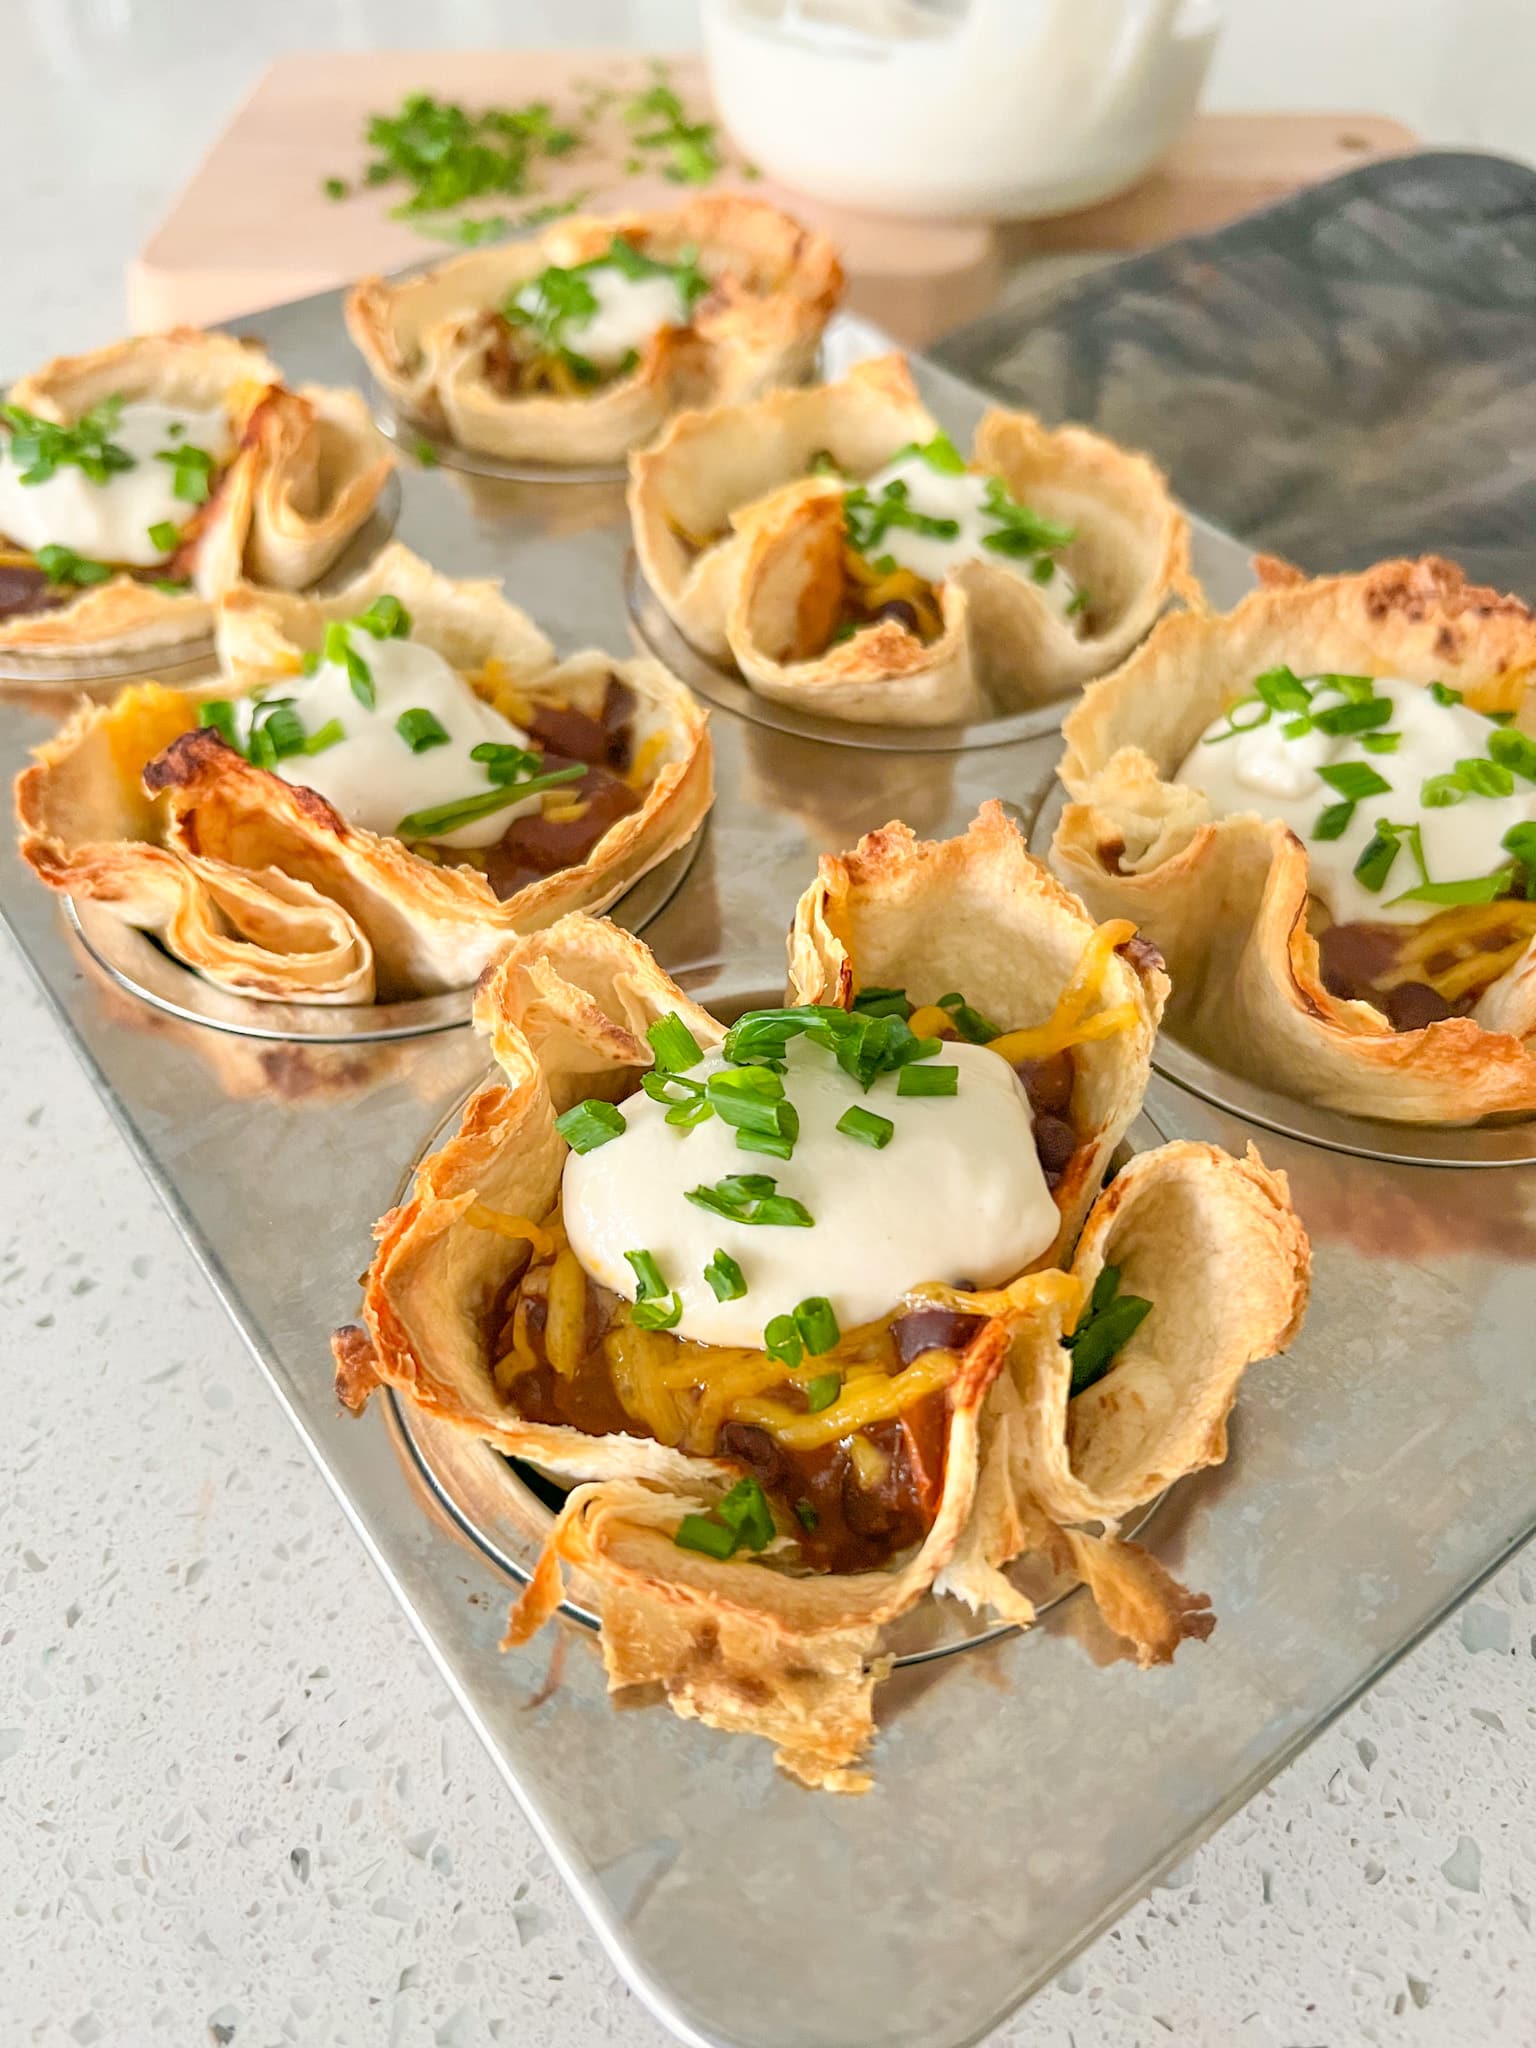 Baked Chili Tortilla Cups